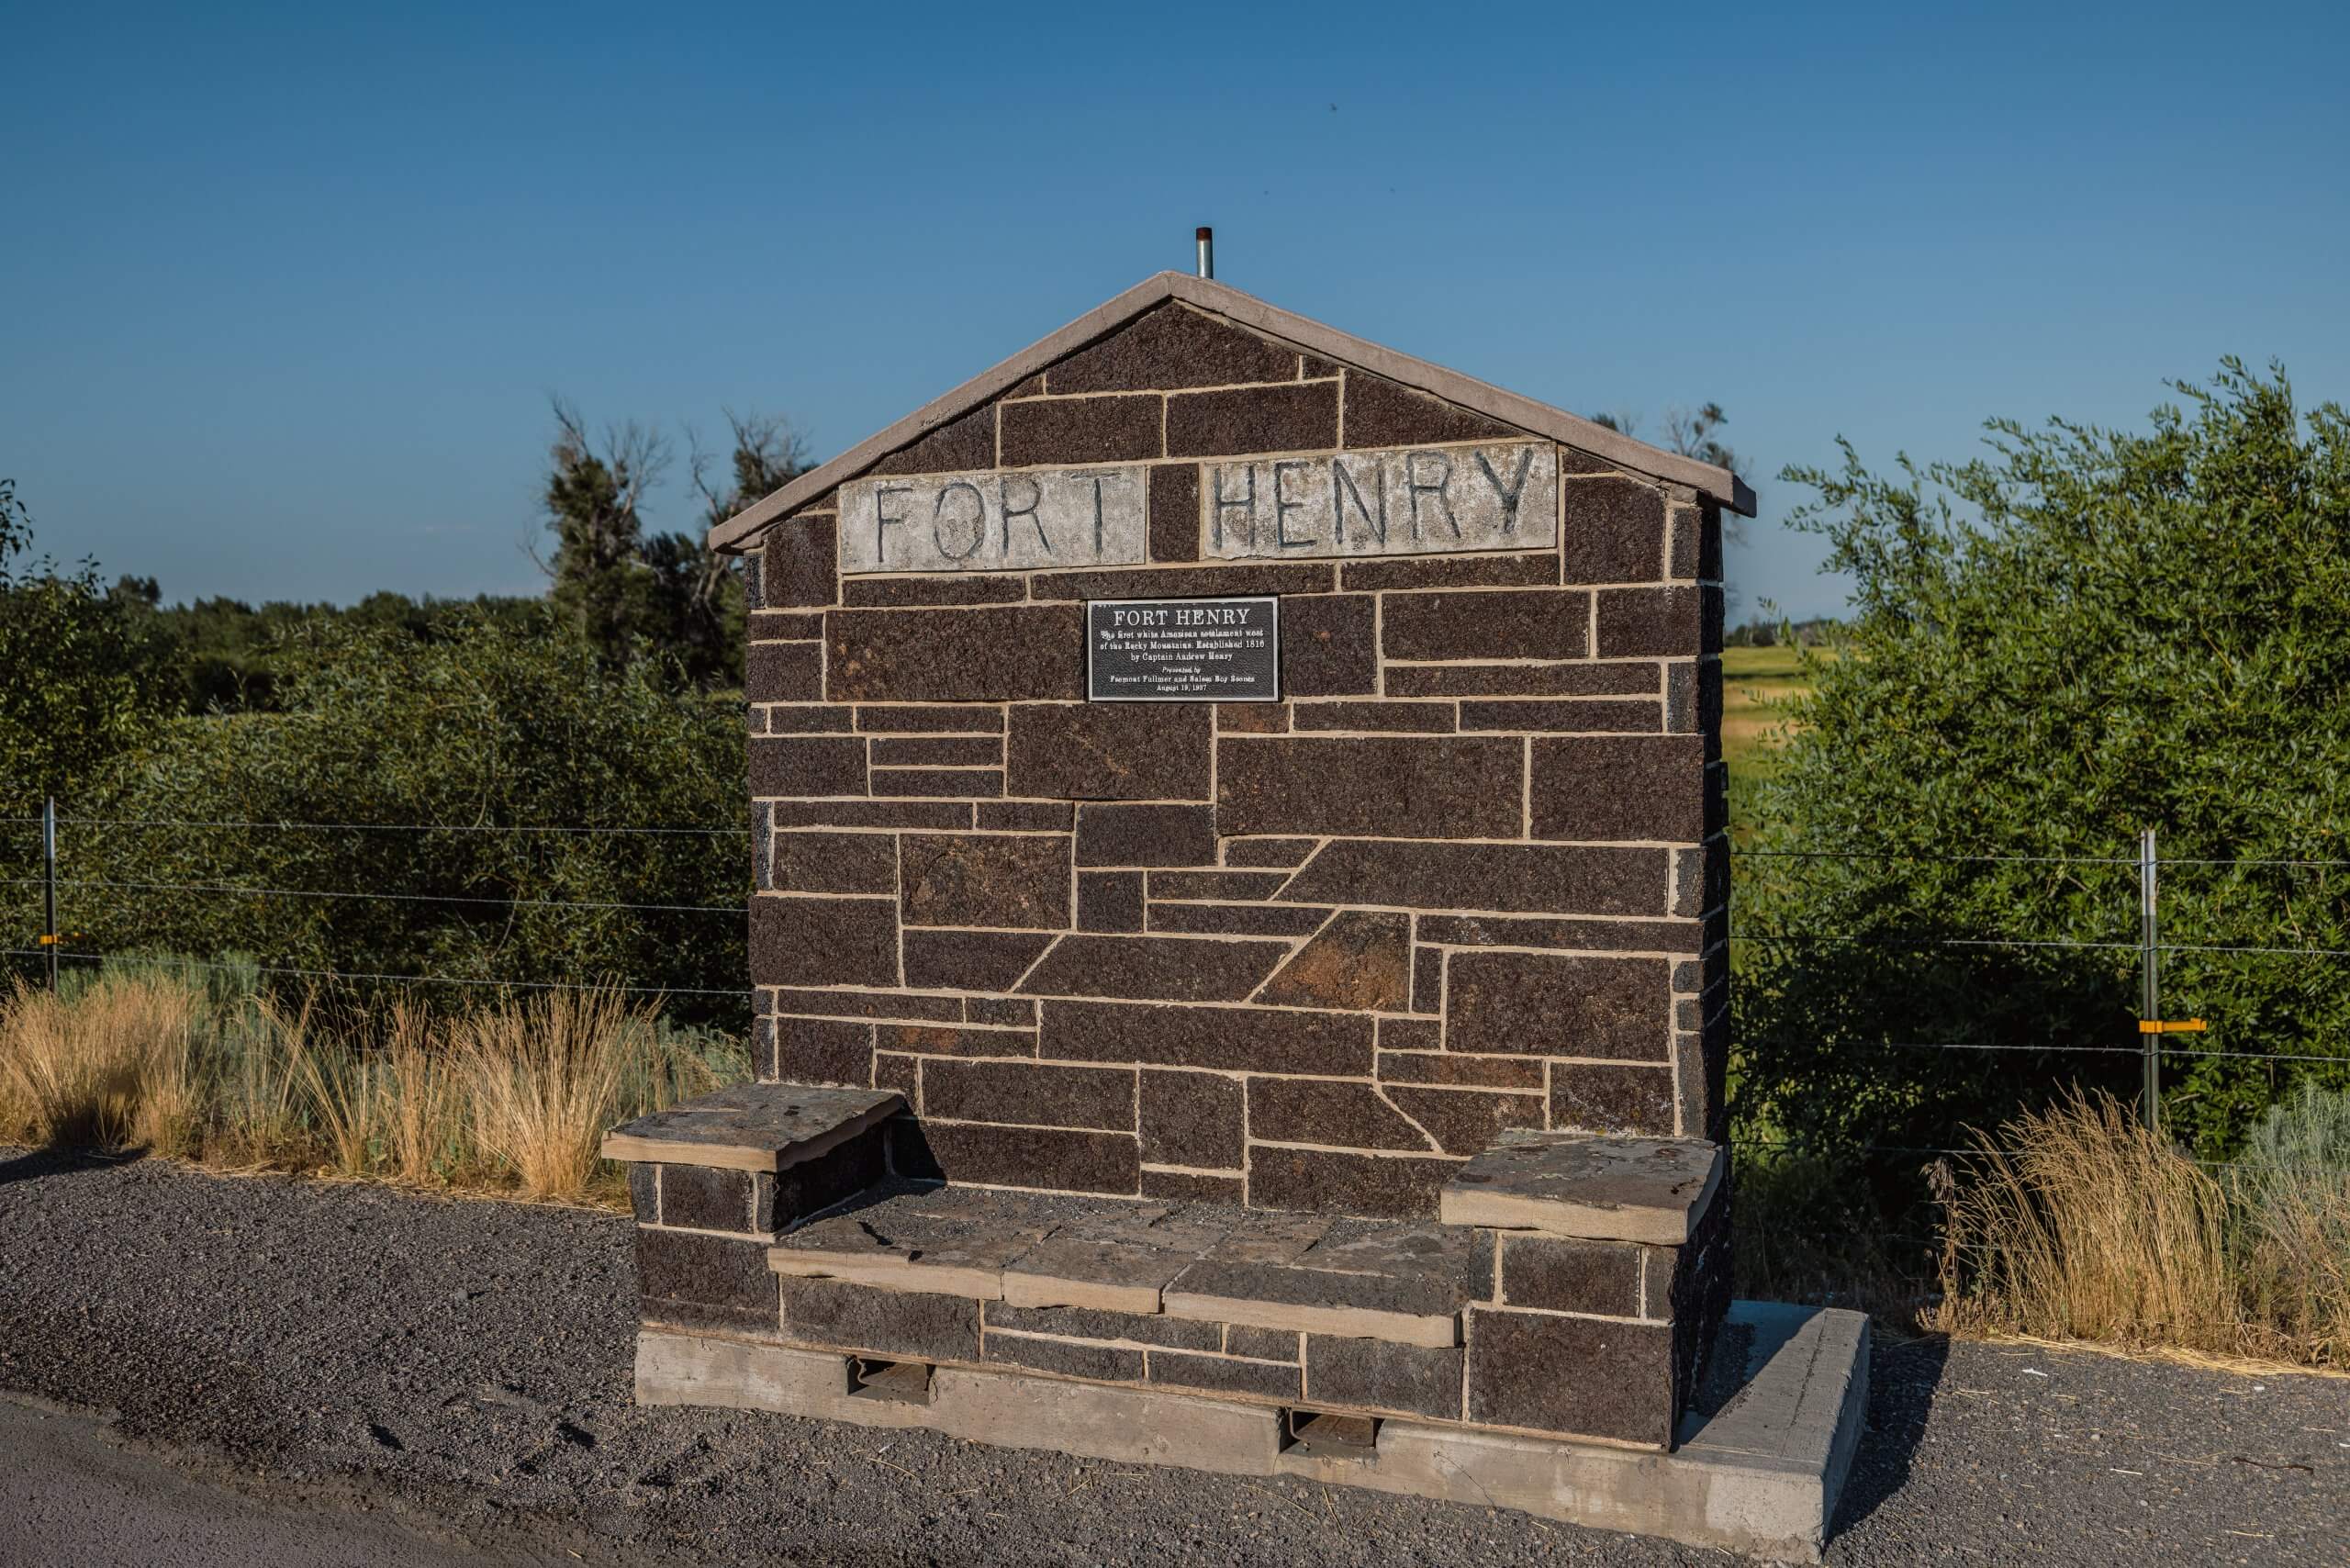 a stone historical marker that reads "fort henry" standing in front of some shrubs